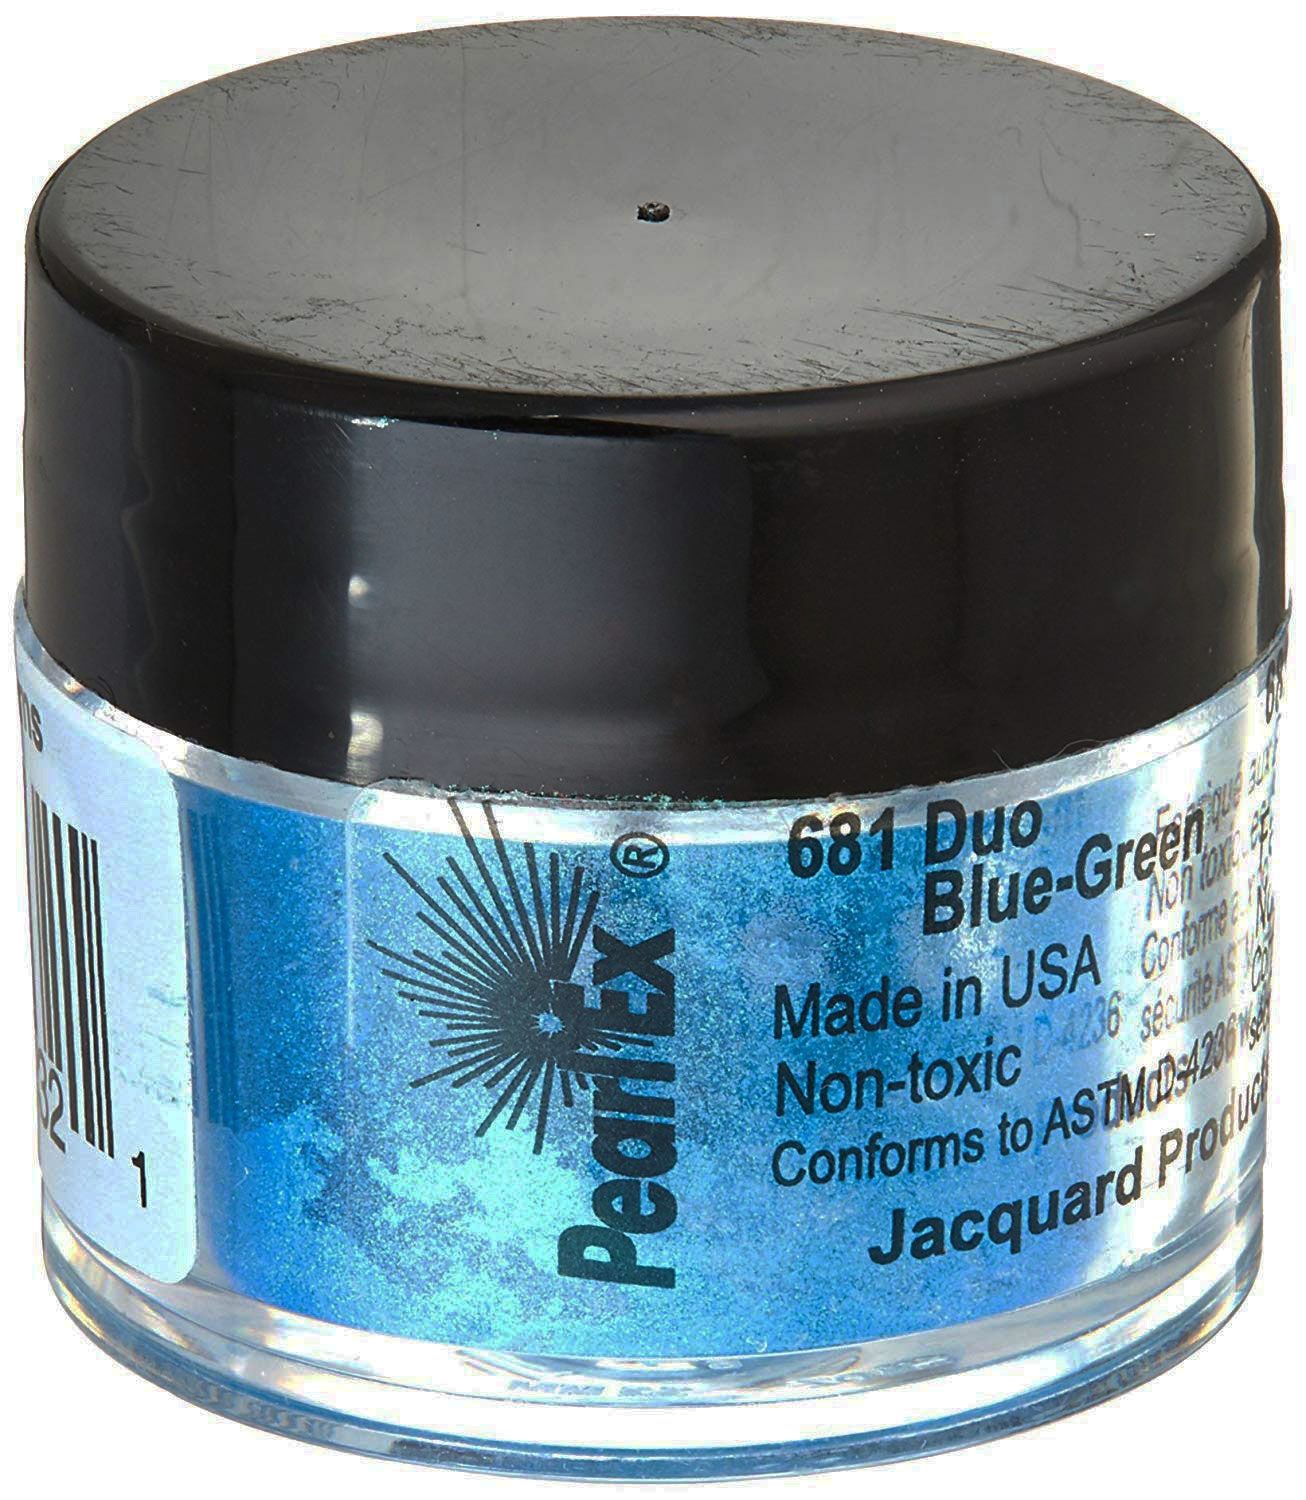 Jacquard Pearl Ex Powdered Duo Blue-Green Pigment 3g